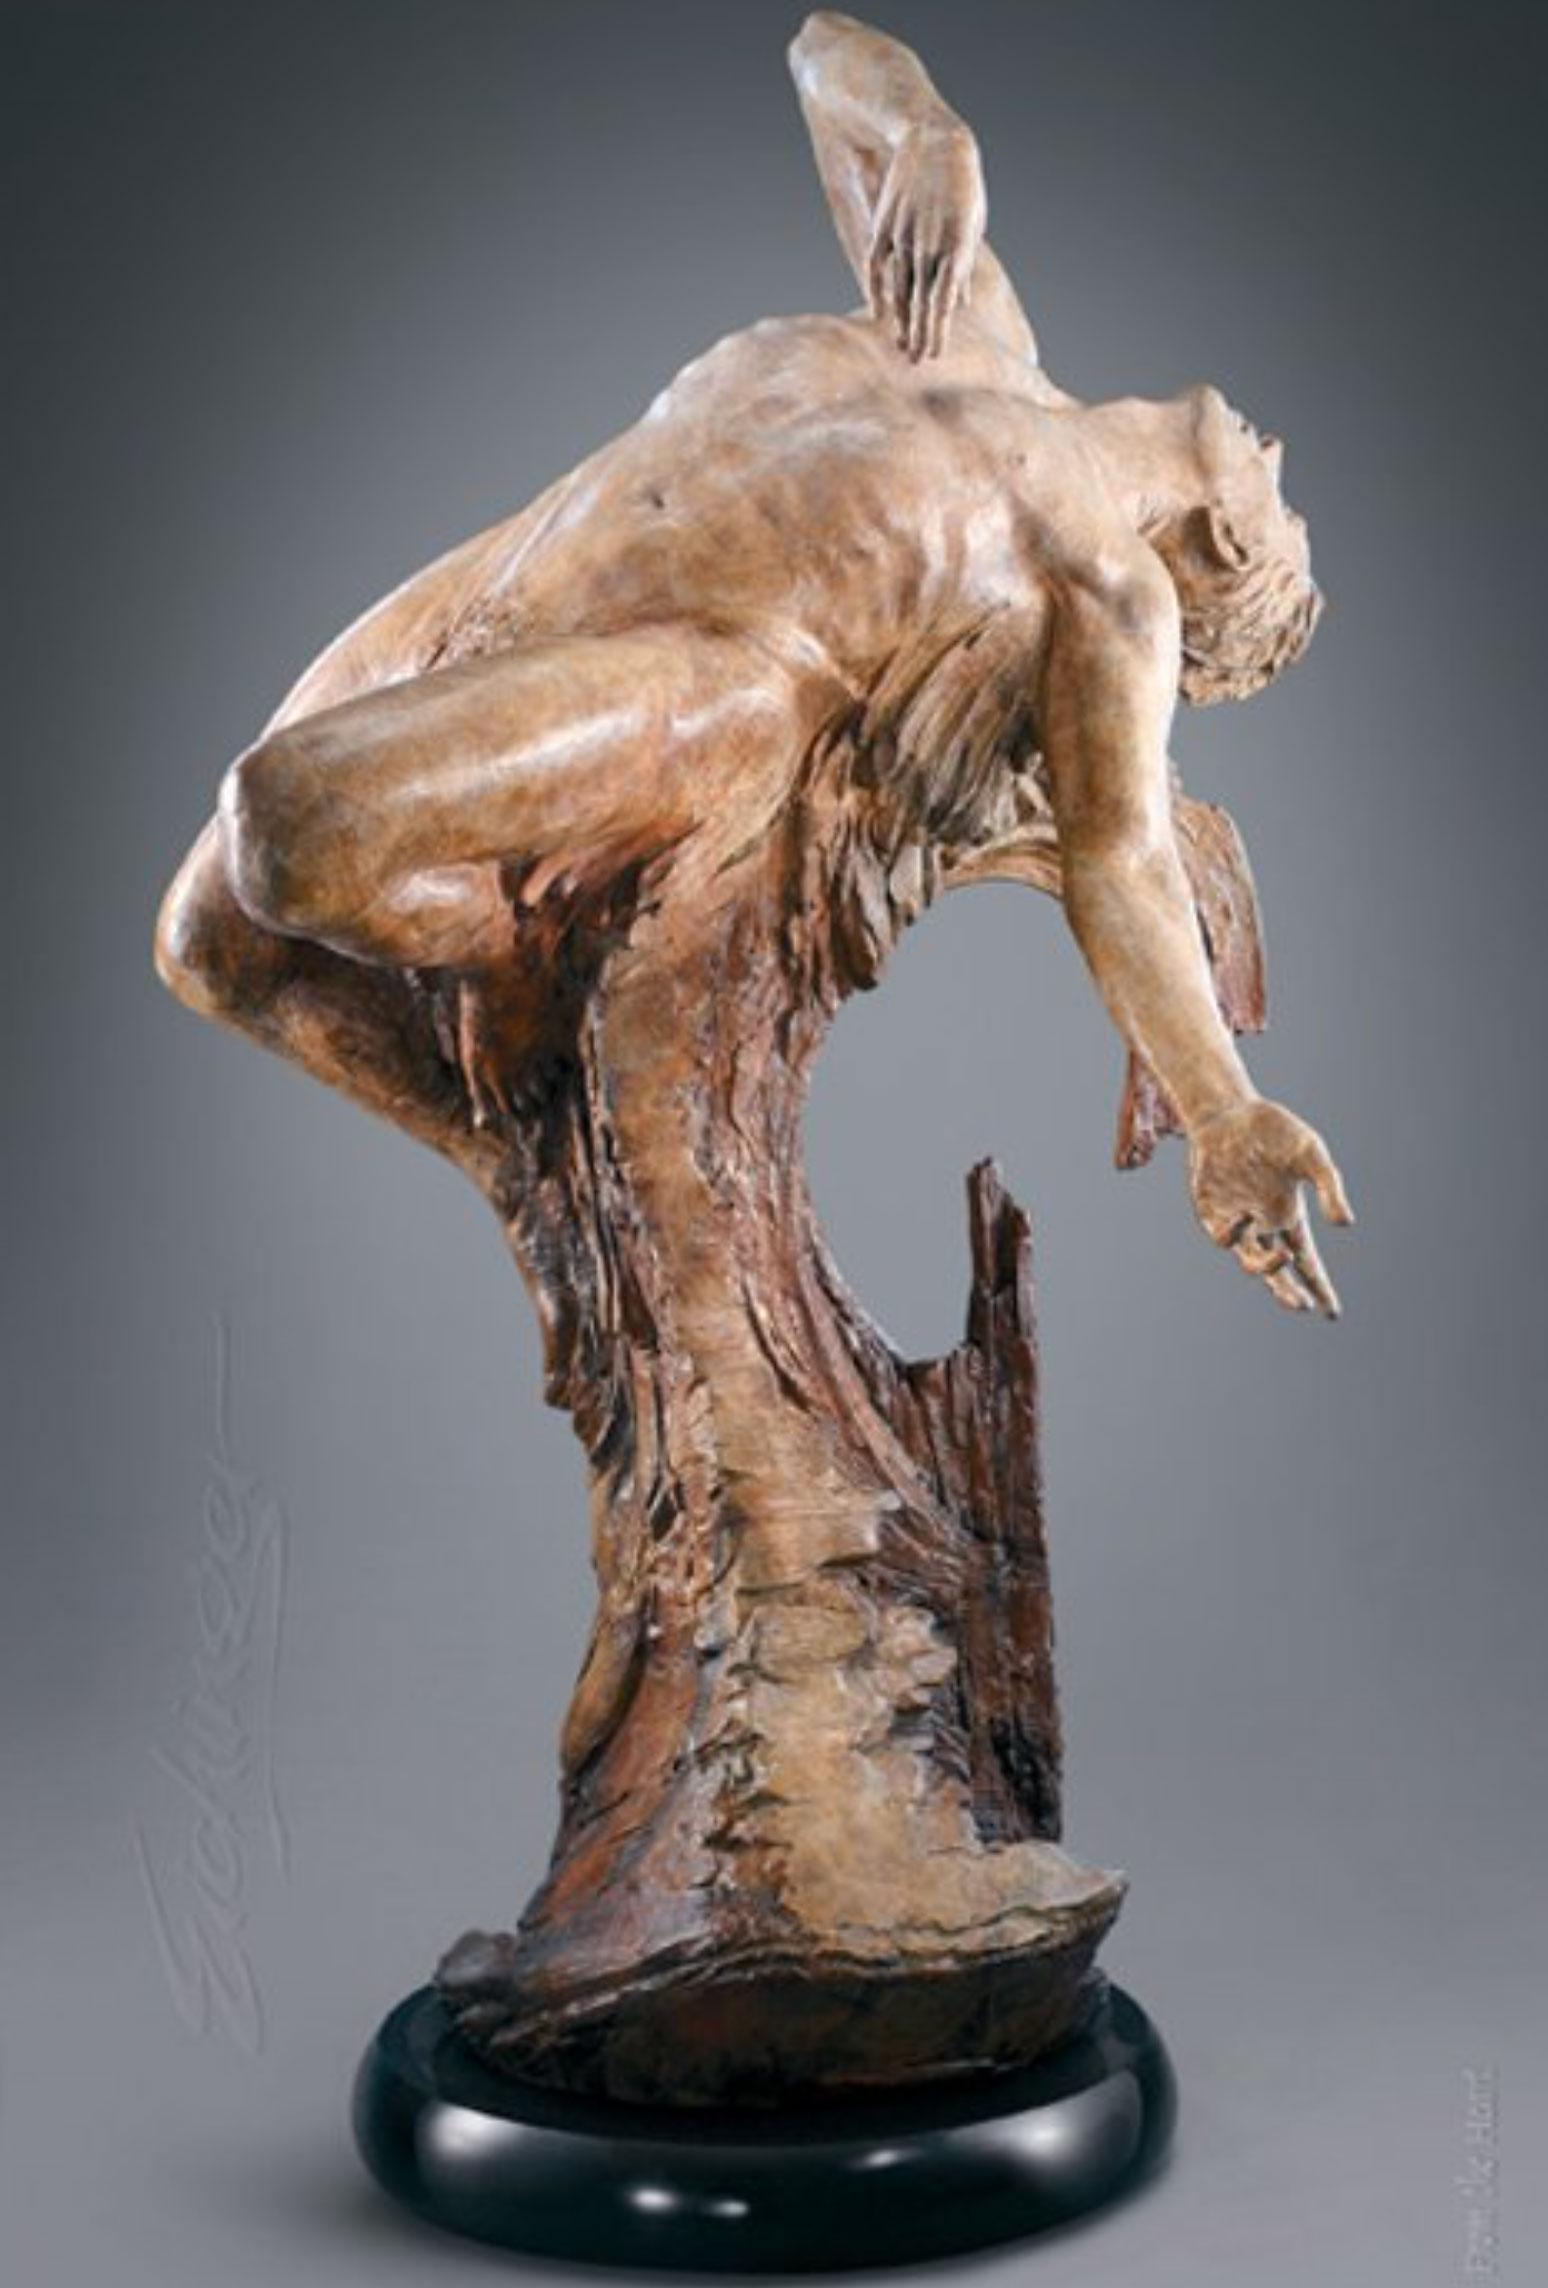 "From the Heart", Martin Eichinger, Figurative, Bronze, Romantic, 62x38x33 in.